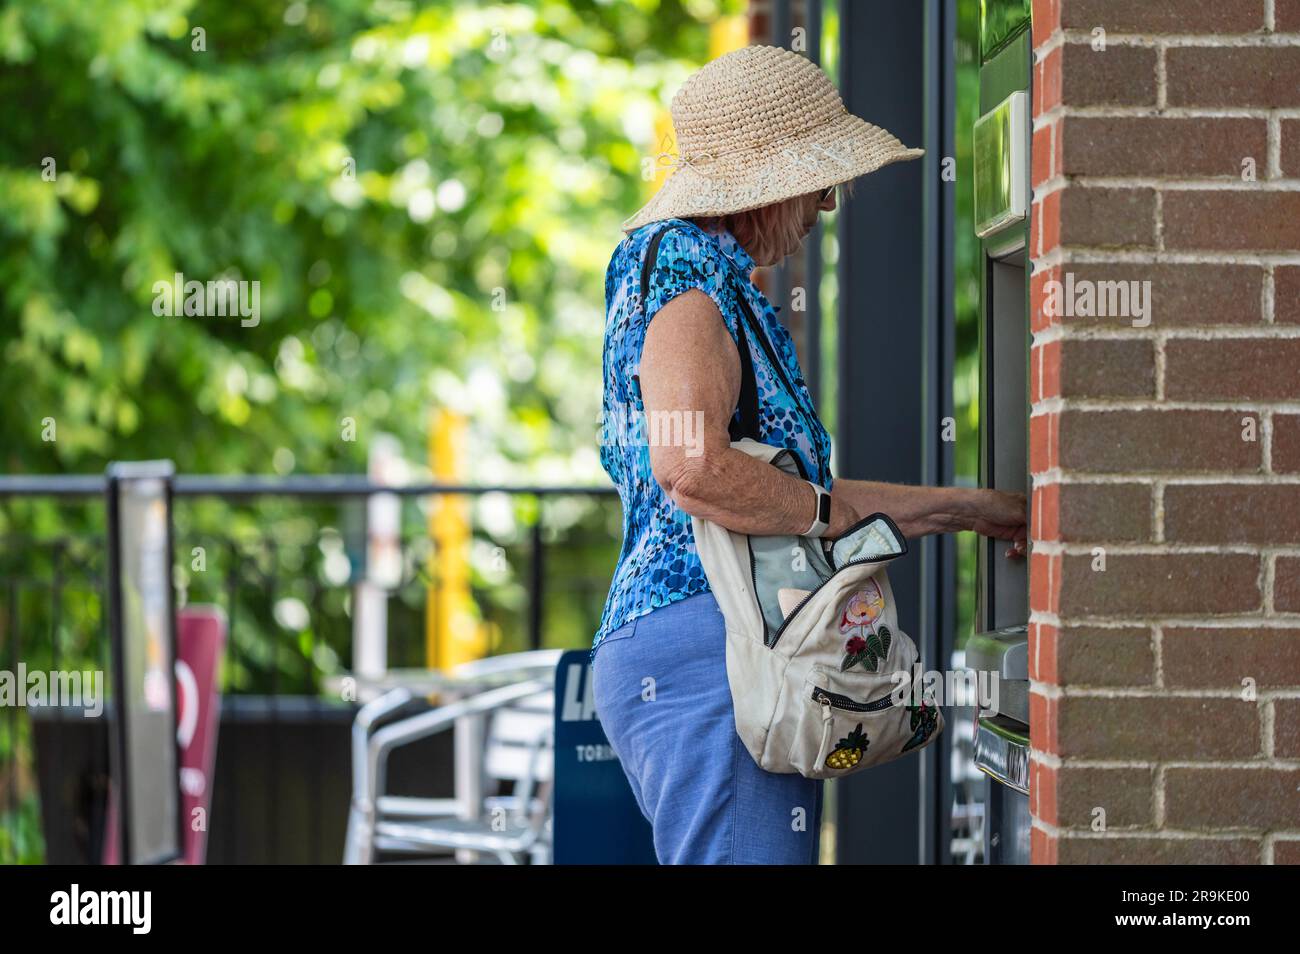 Senior lady getting money out in cash, at an ATM, cashpoint or 'hole in the wall' cash machine, in the UK. Stock Photo